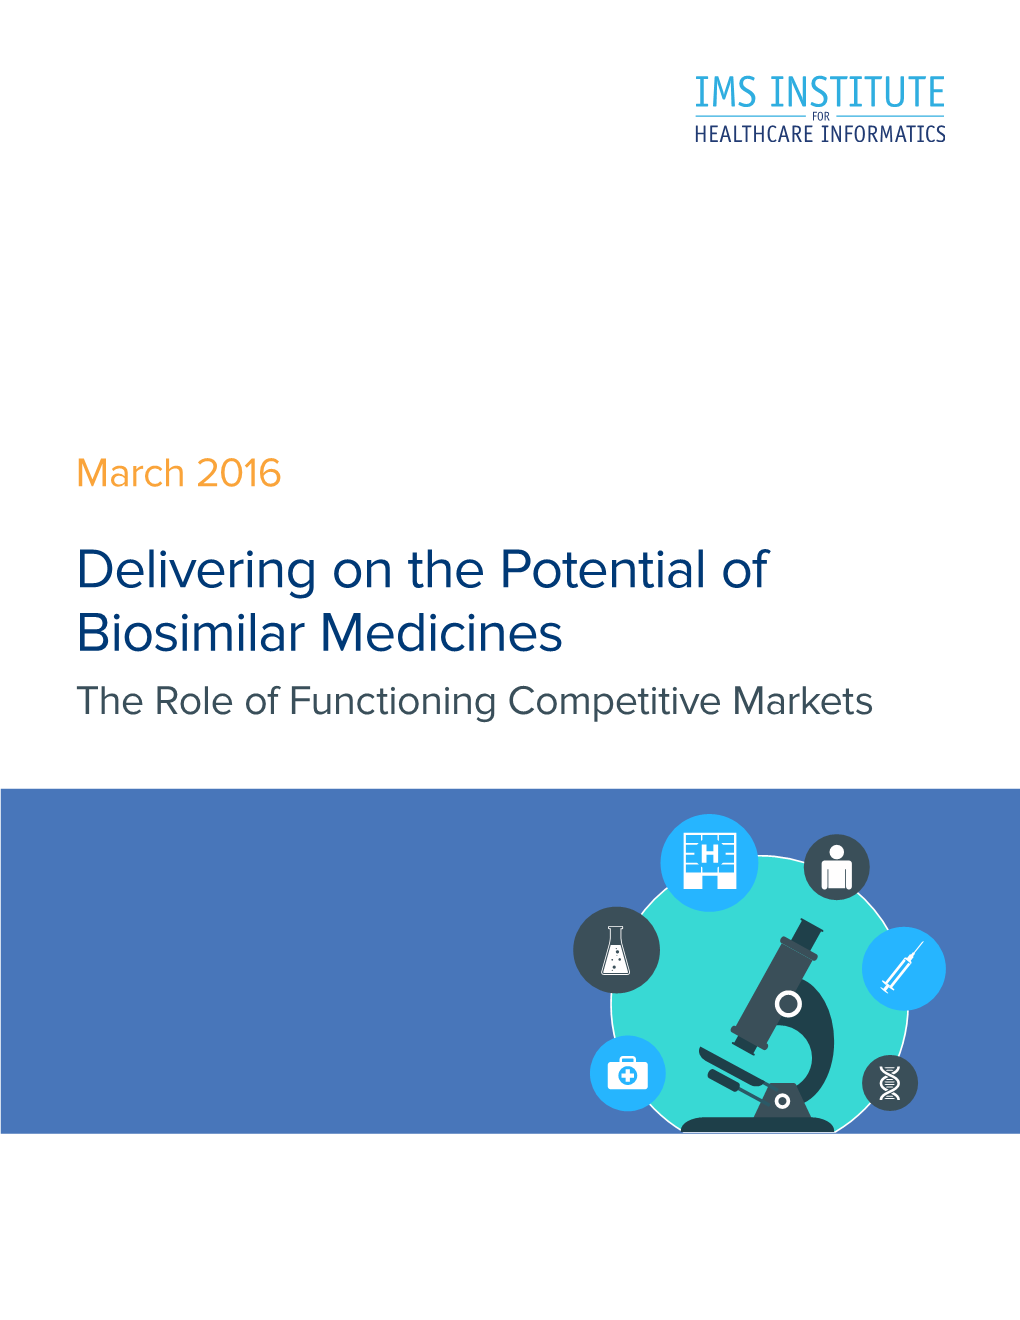 Delivering on the Potential of Biosimilar Medicines the Role of Functioning Competitive Markets Introduction